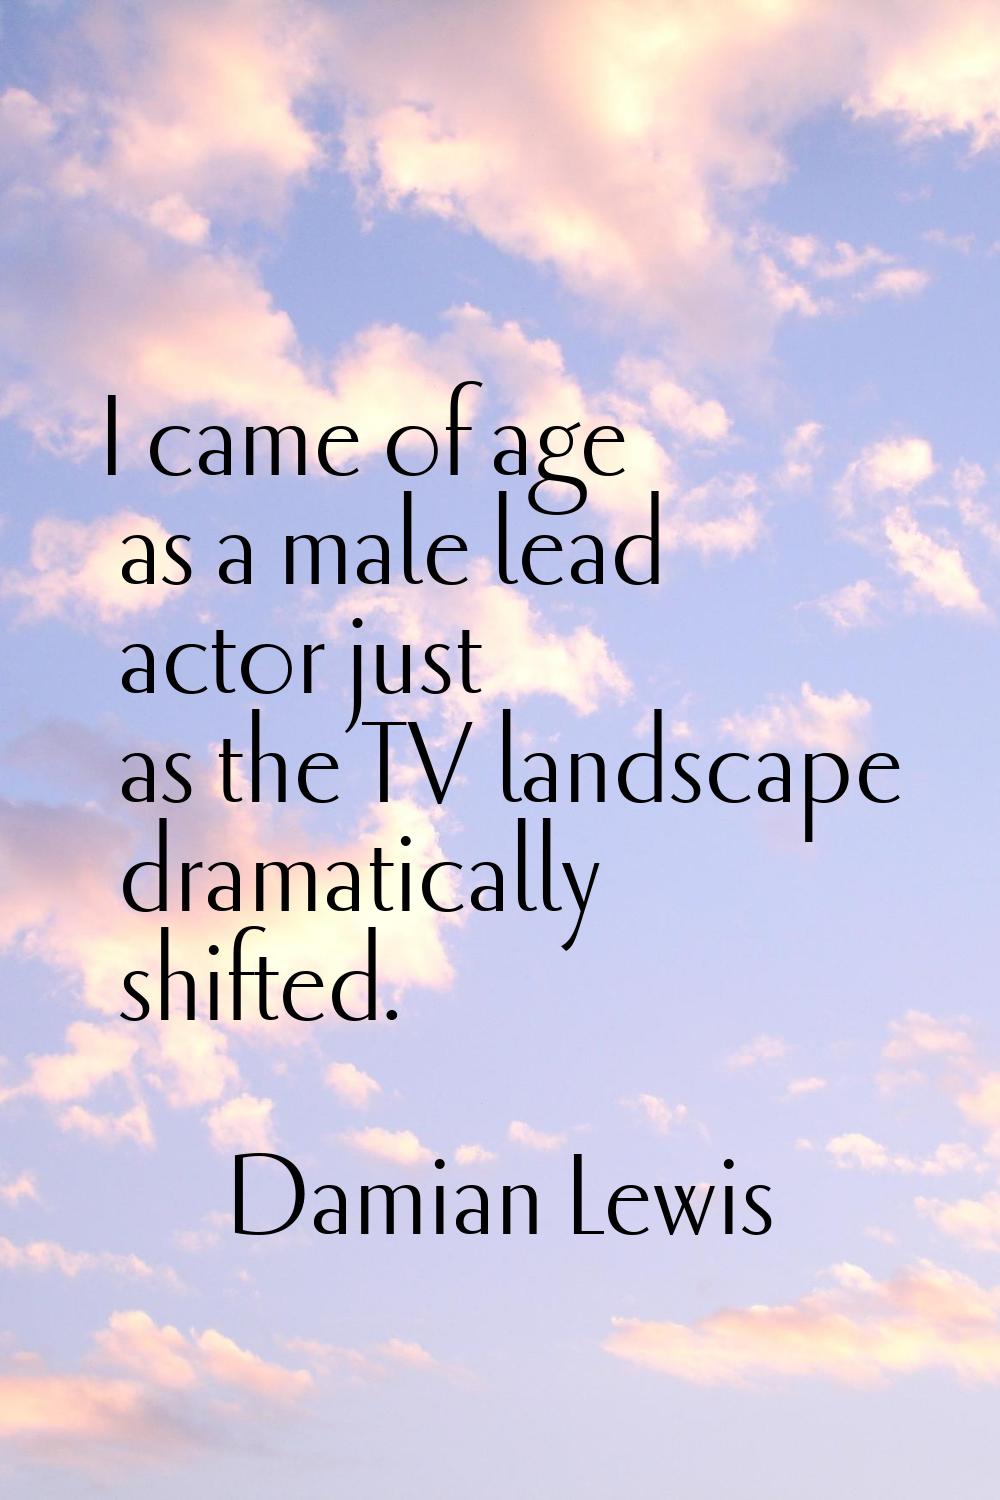 I came of age as a male lead actor just as the TV landscape dramatically shifted.